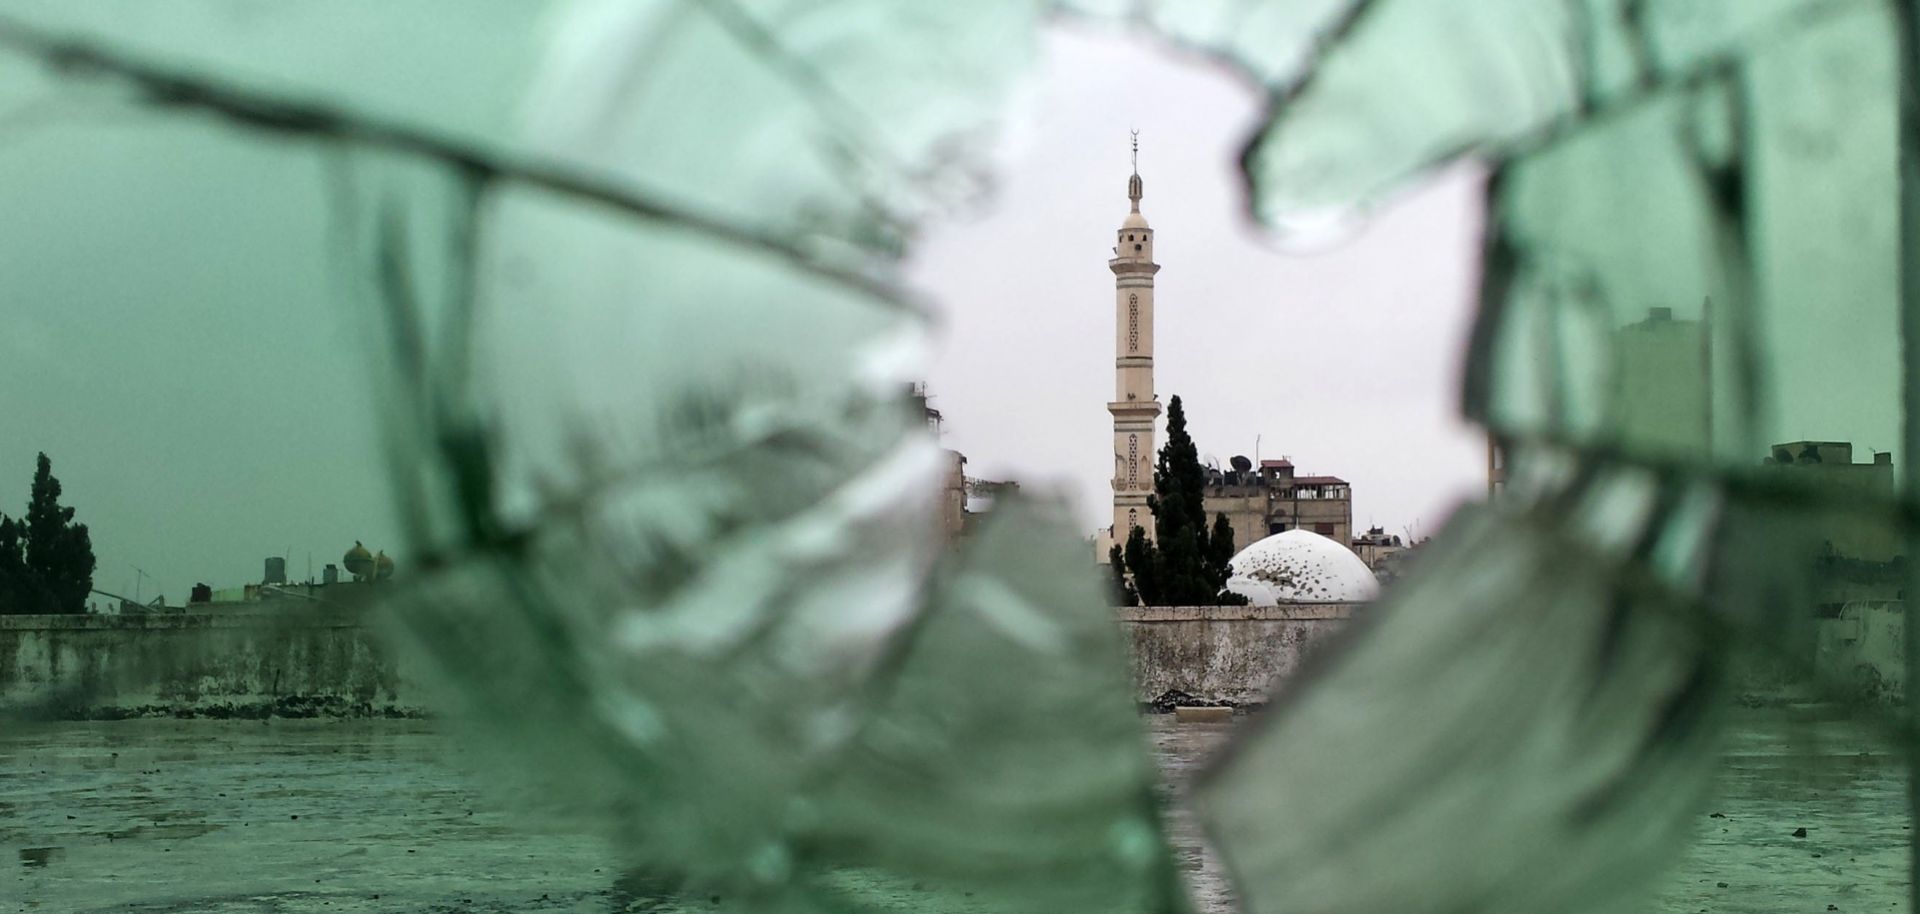 Nearly seven years of war have transformed Homs in body and soul.